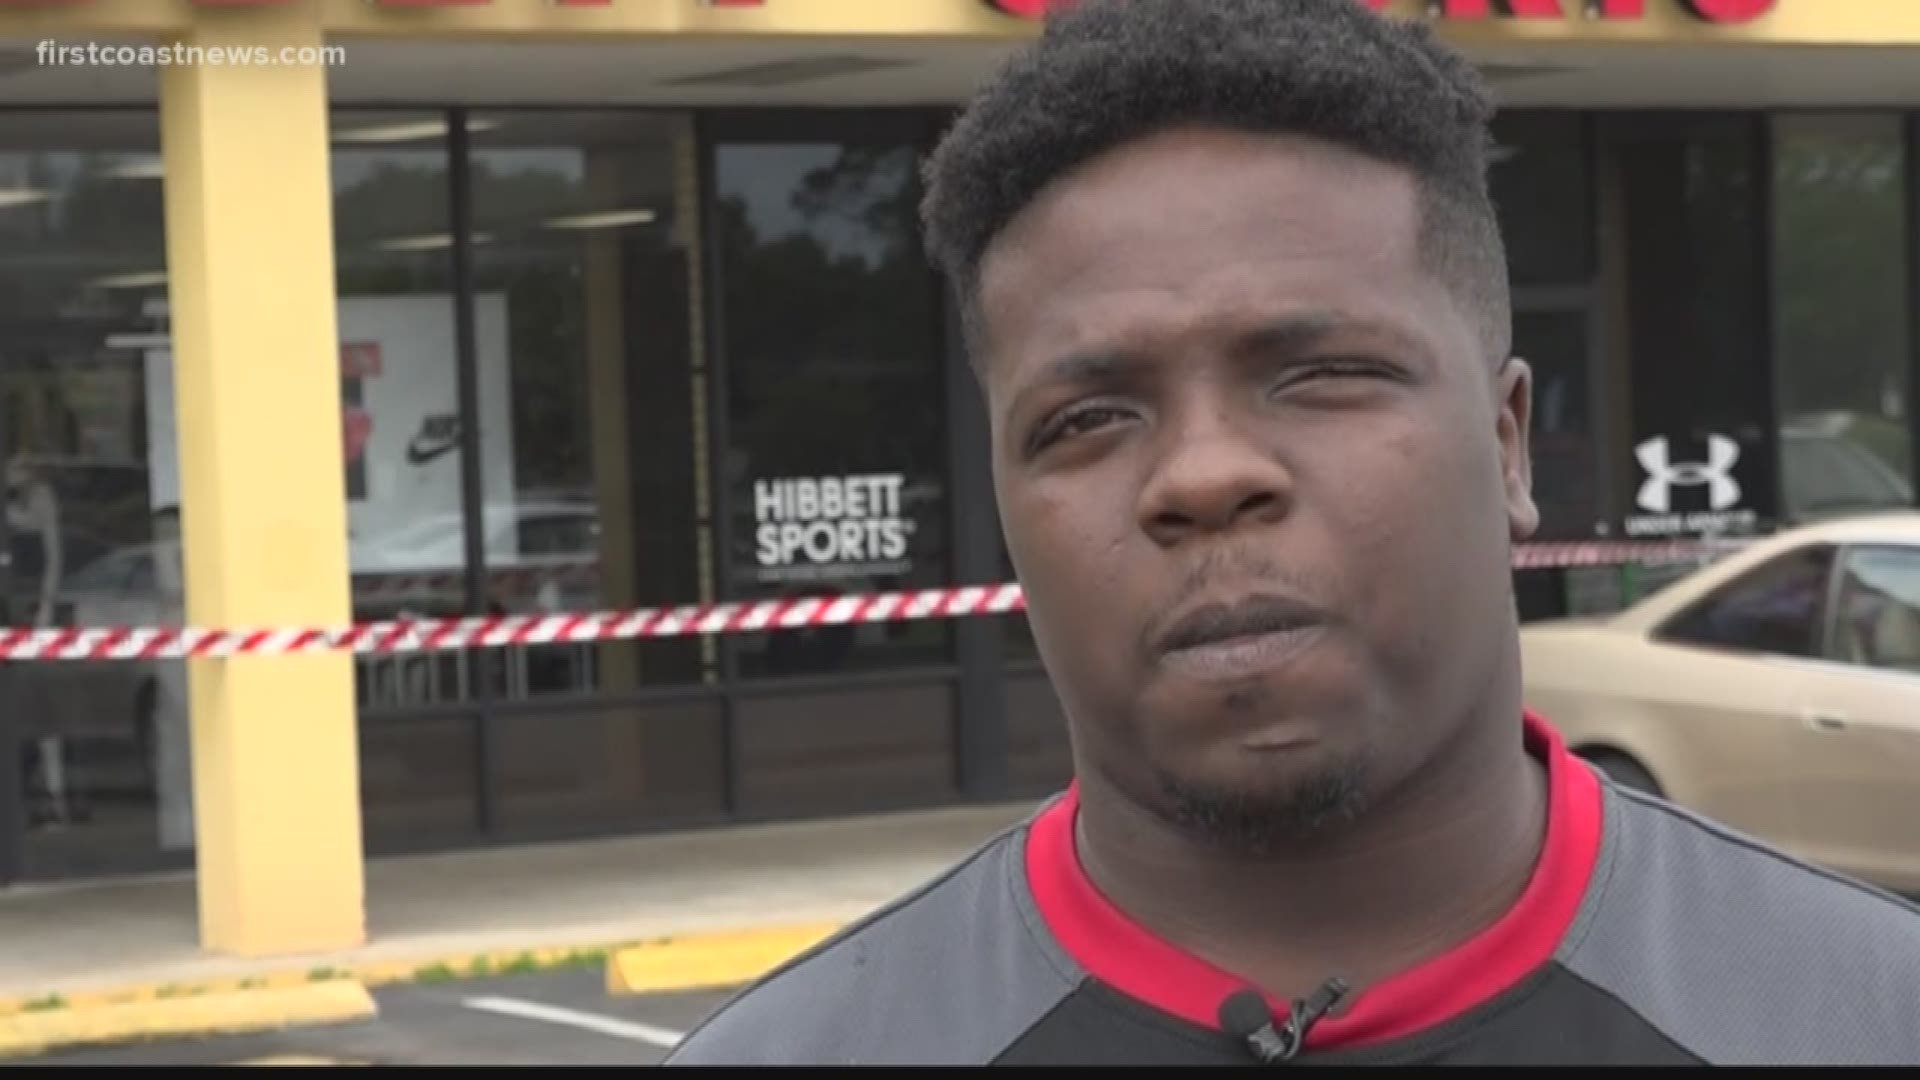 A young man called a Westside shoe store trying to find a par of shoes under $30. An employee at Hibbett Sports asked his mom to bring his barely worn shoes and gave them to the boy.